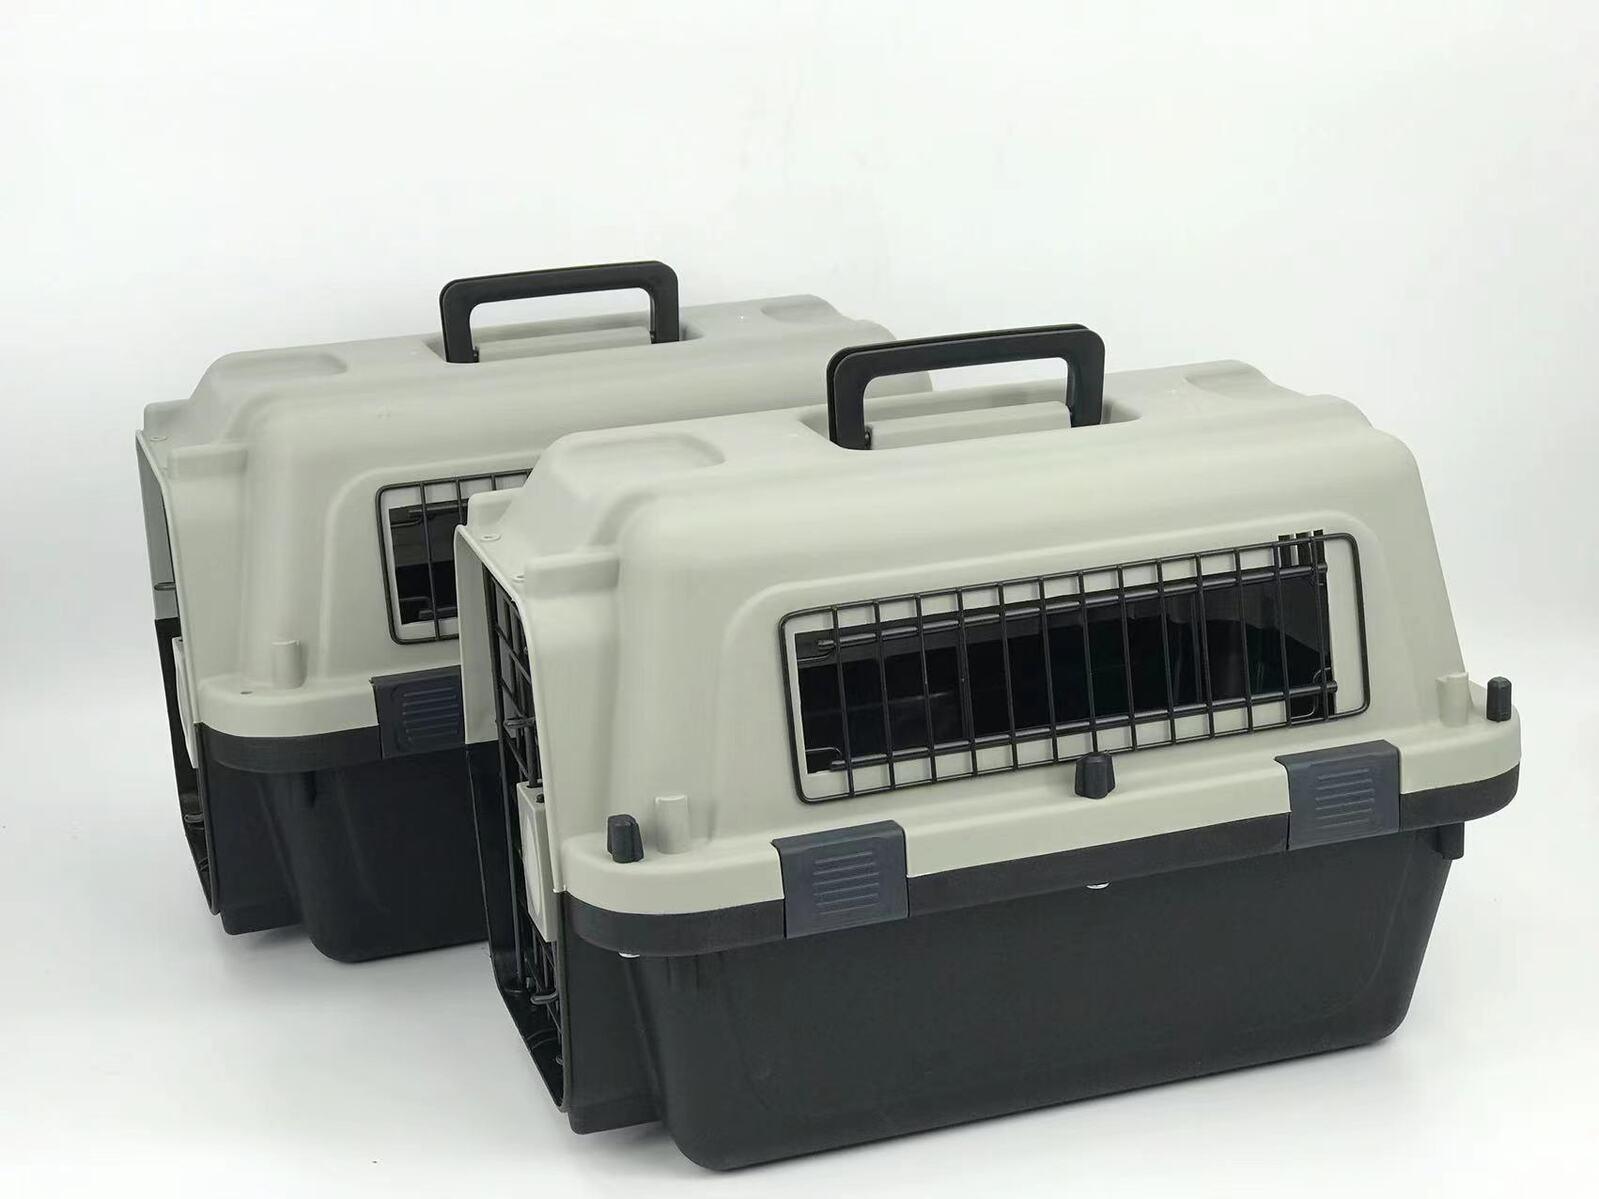 YES4PETS Medium Portable Pet Dog Cat Carrier Travel Bag Cage House Safety Lockable Kennel Grey - Pets Gear